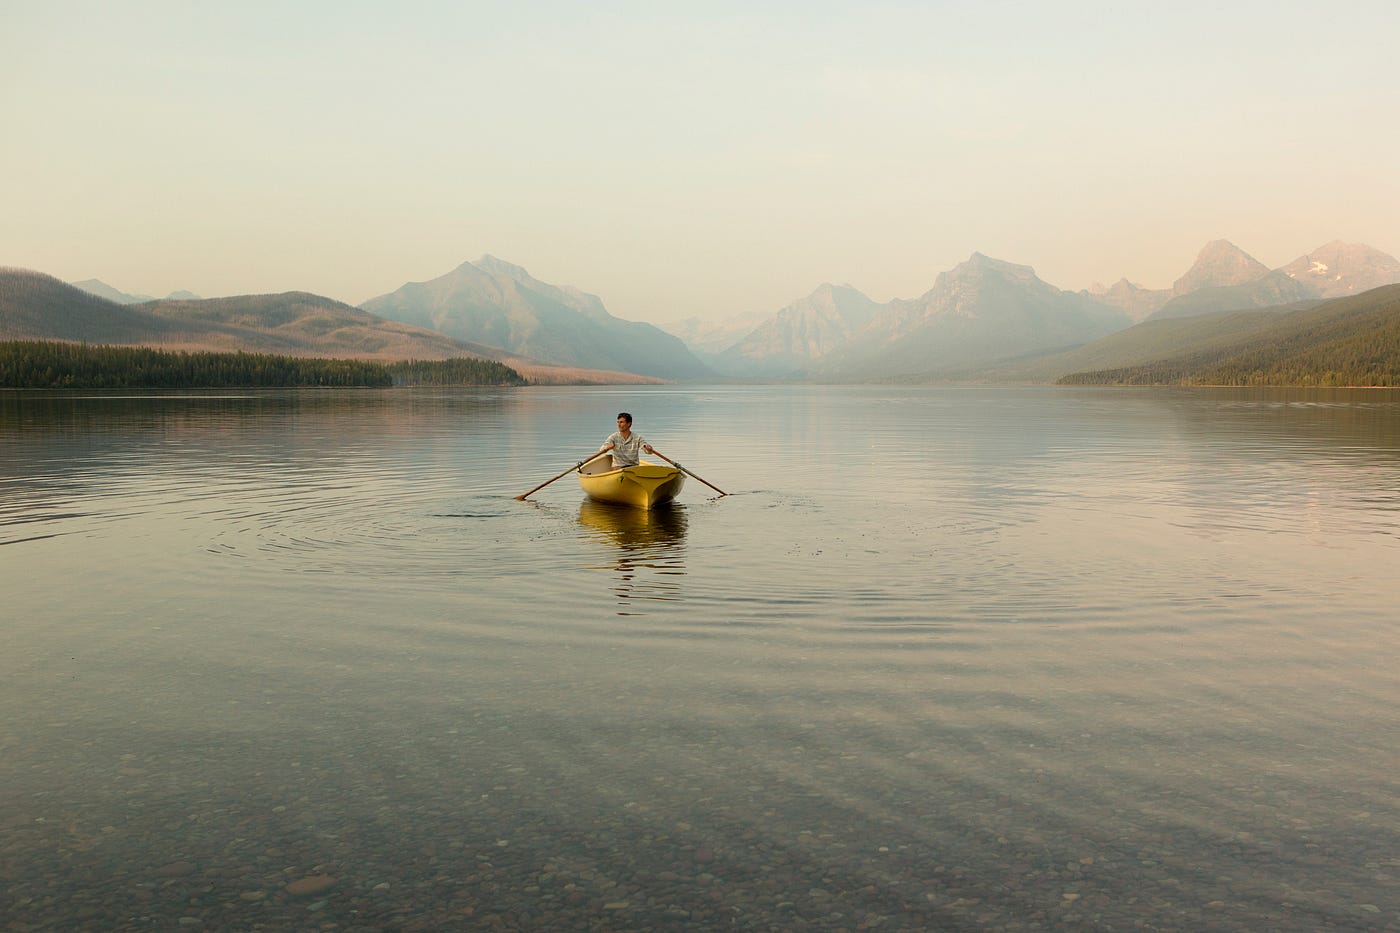 A man rowing a boat in Glacier National Park. Mood is a bit mysterious and muted.